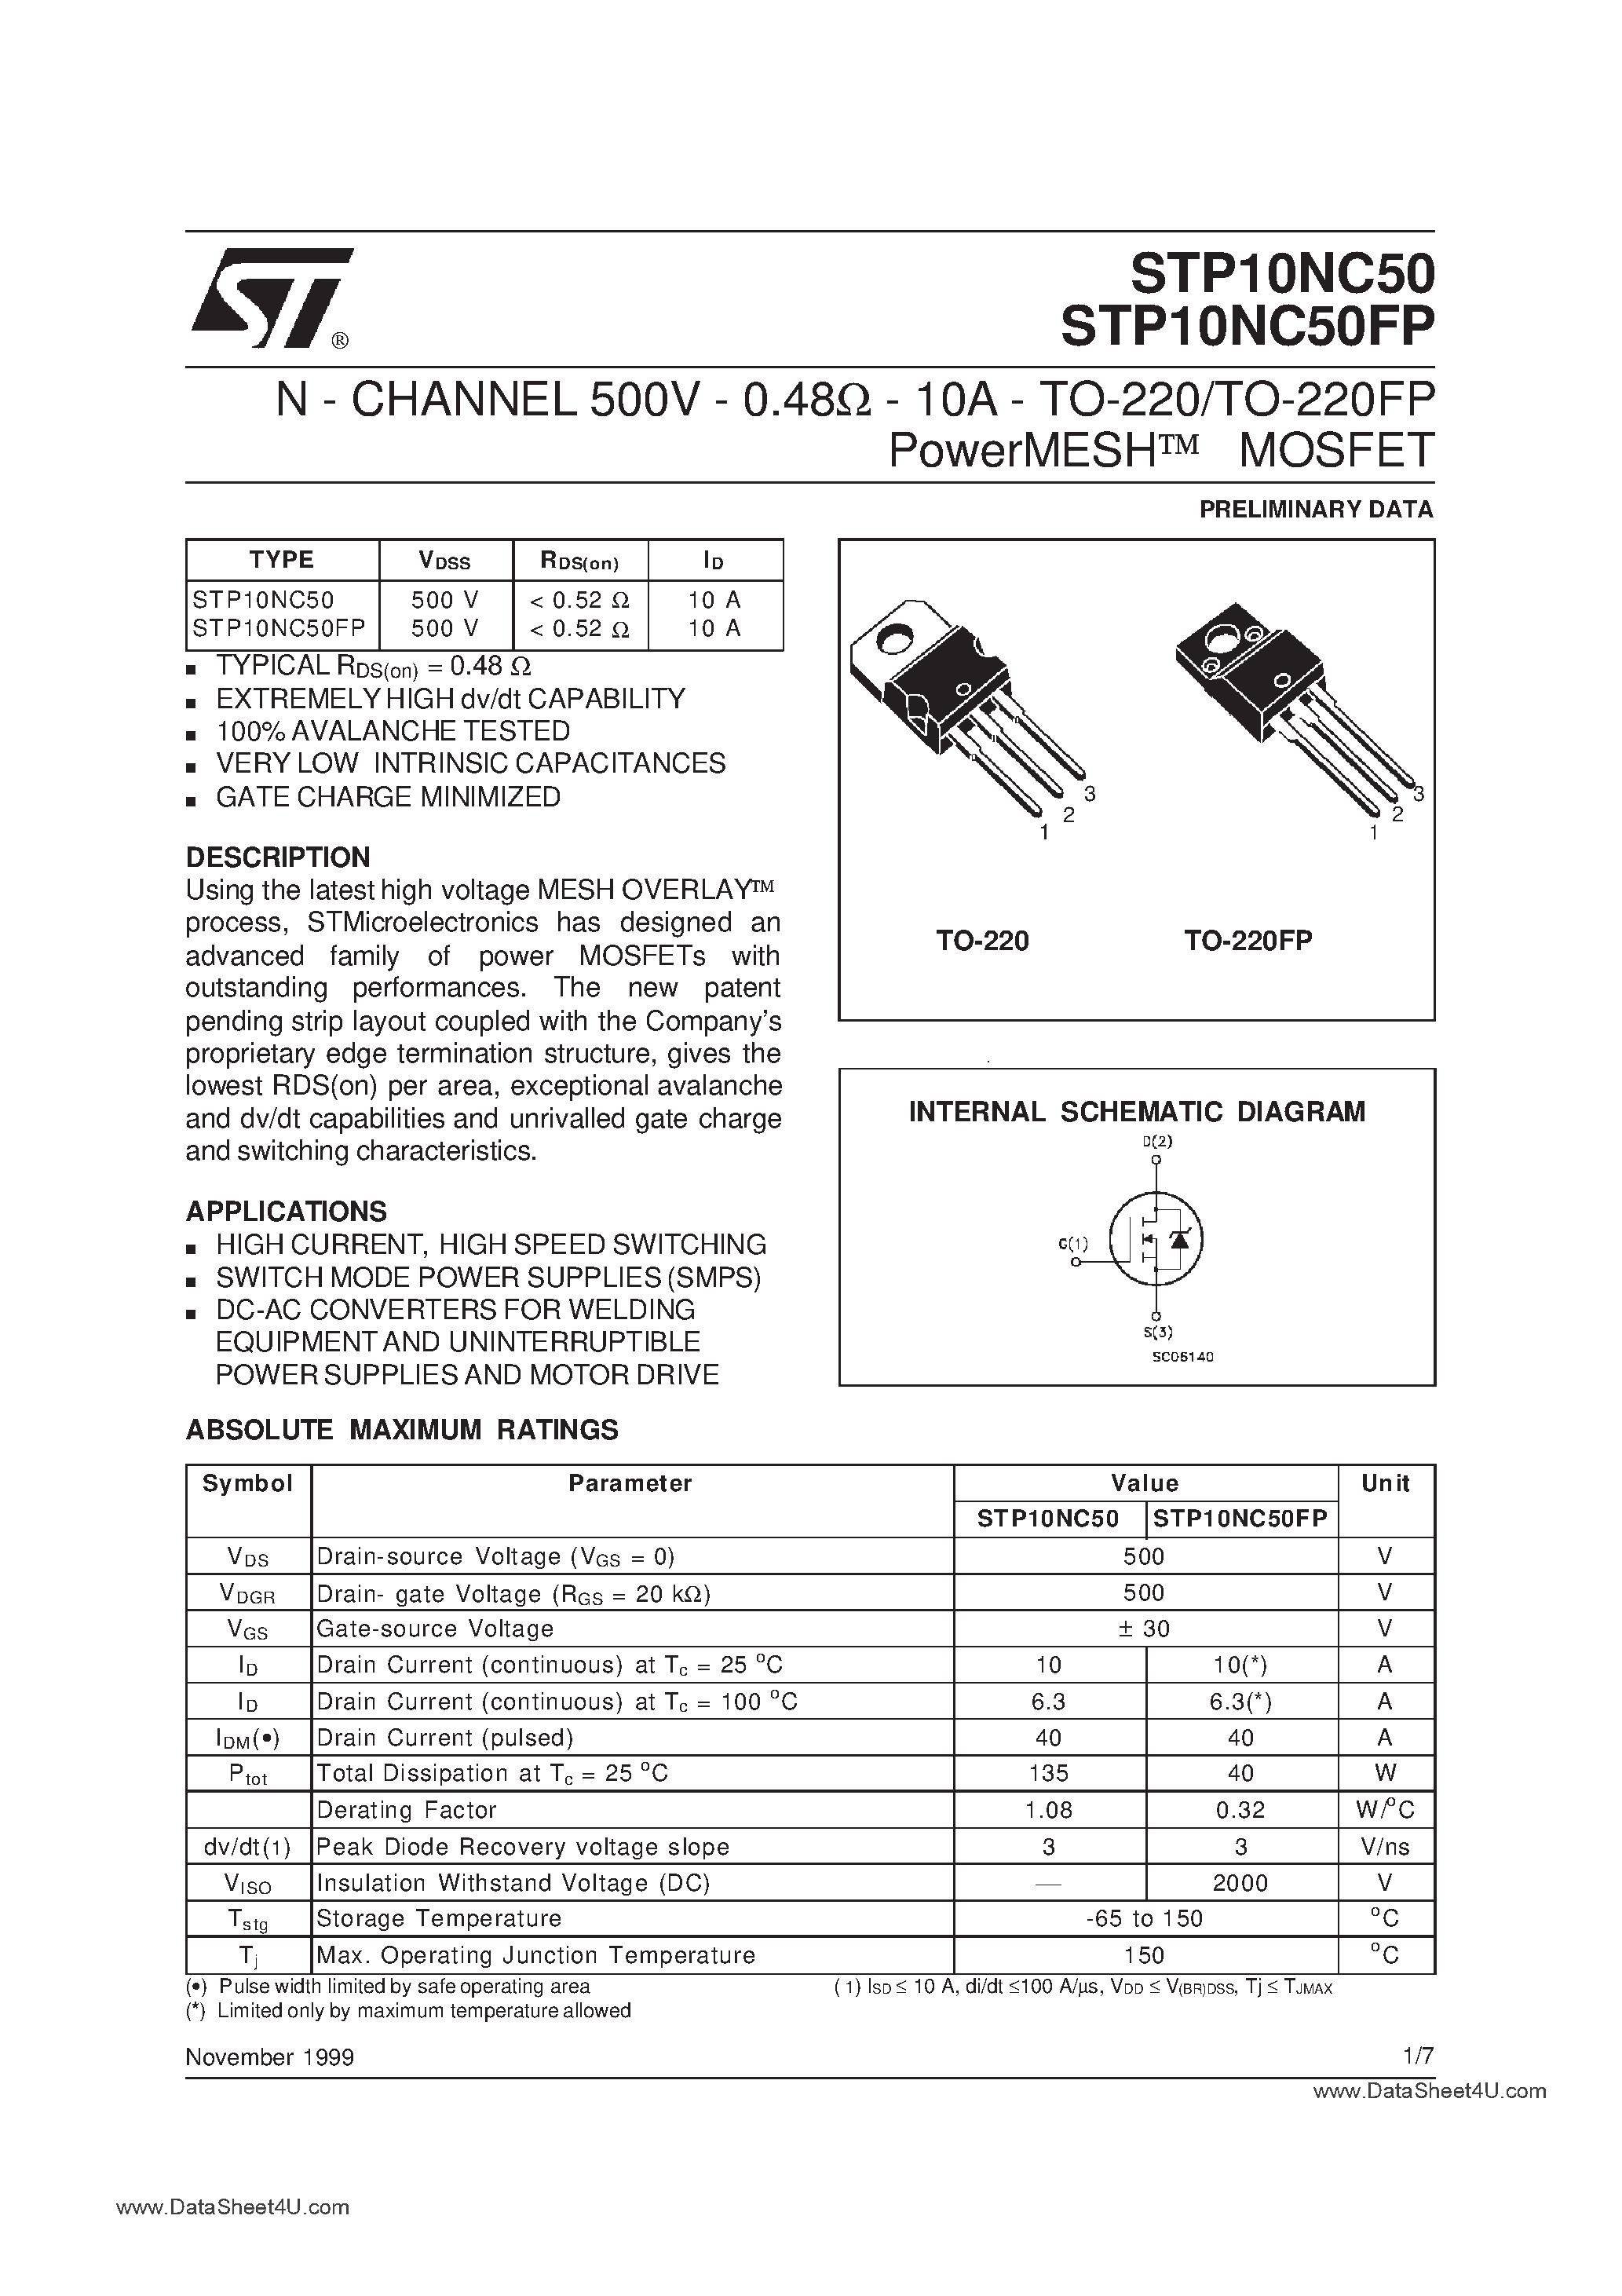 Datasheet STP10NC50 - N-CHANNEL Power MOSFET page 1